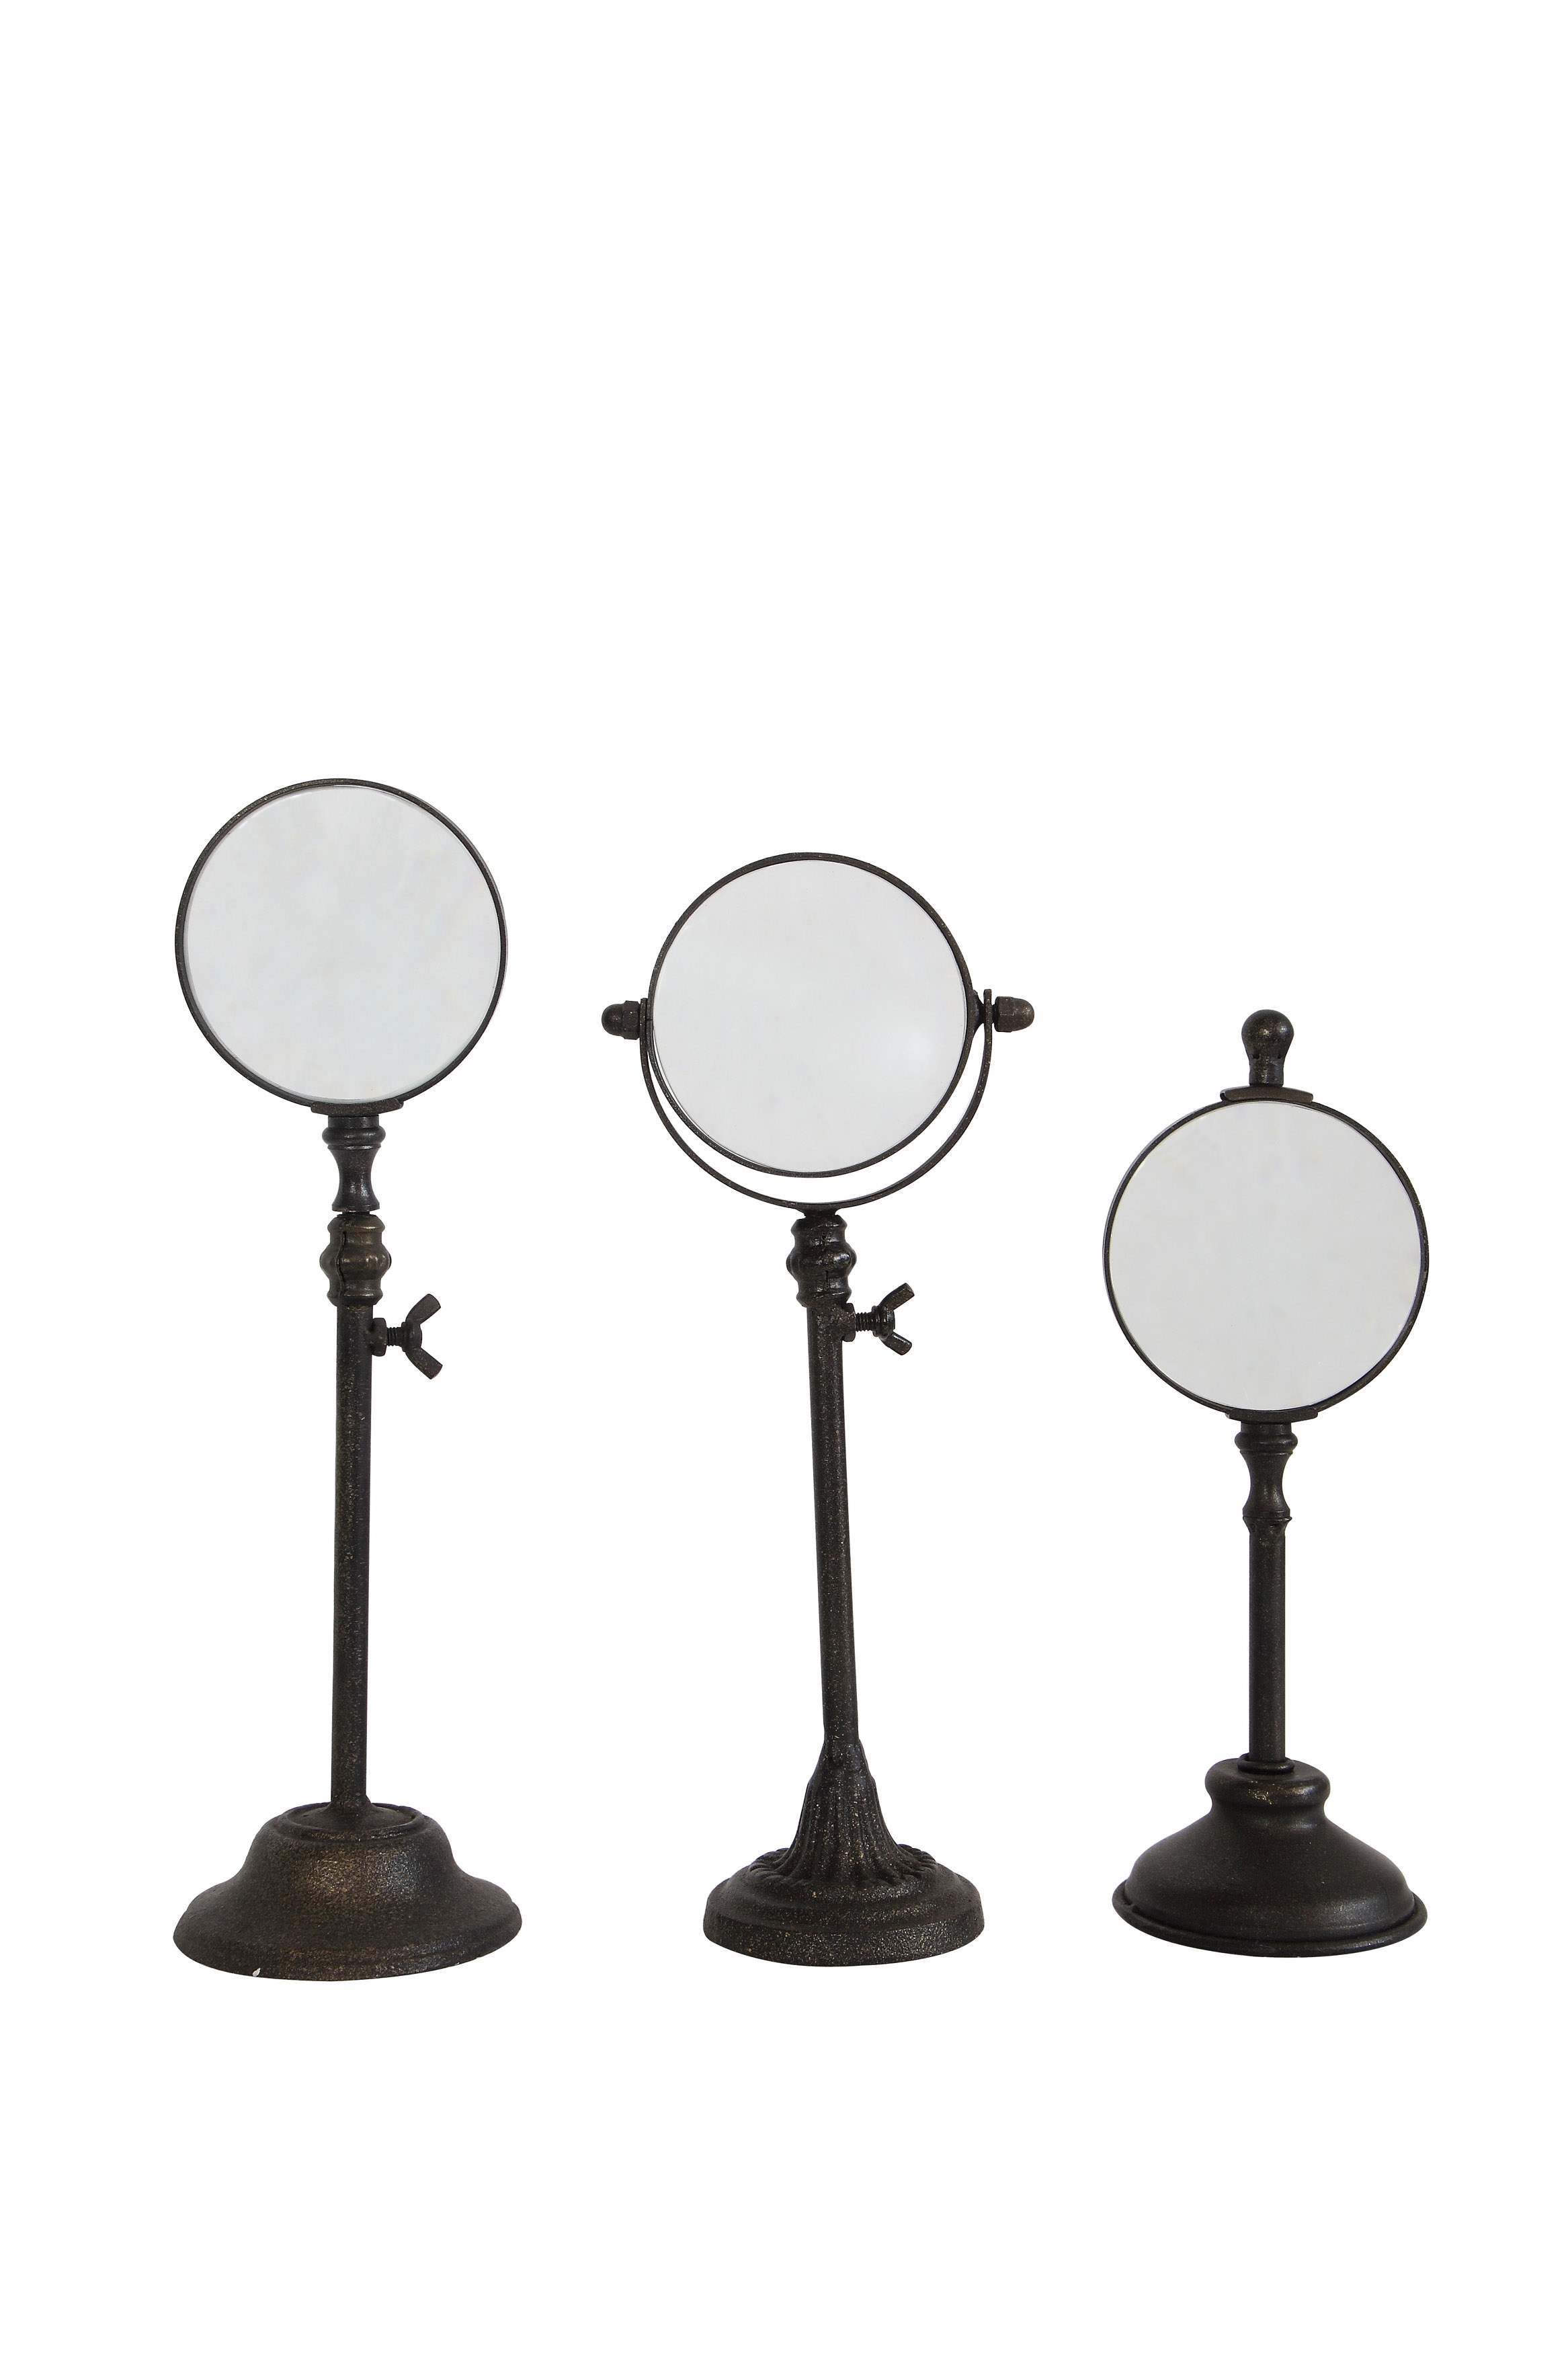 Metal Magnifying Glasses on Stands (Set of 3 Sizes) - Image 0